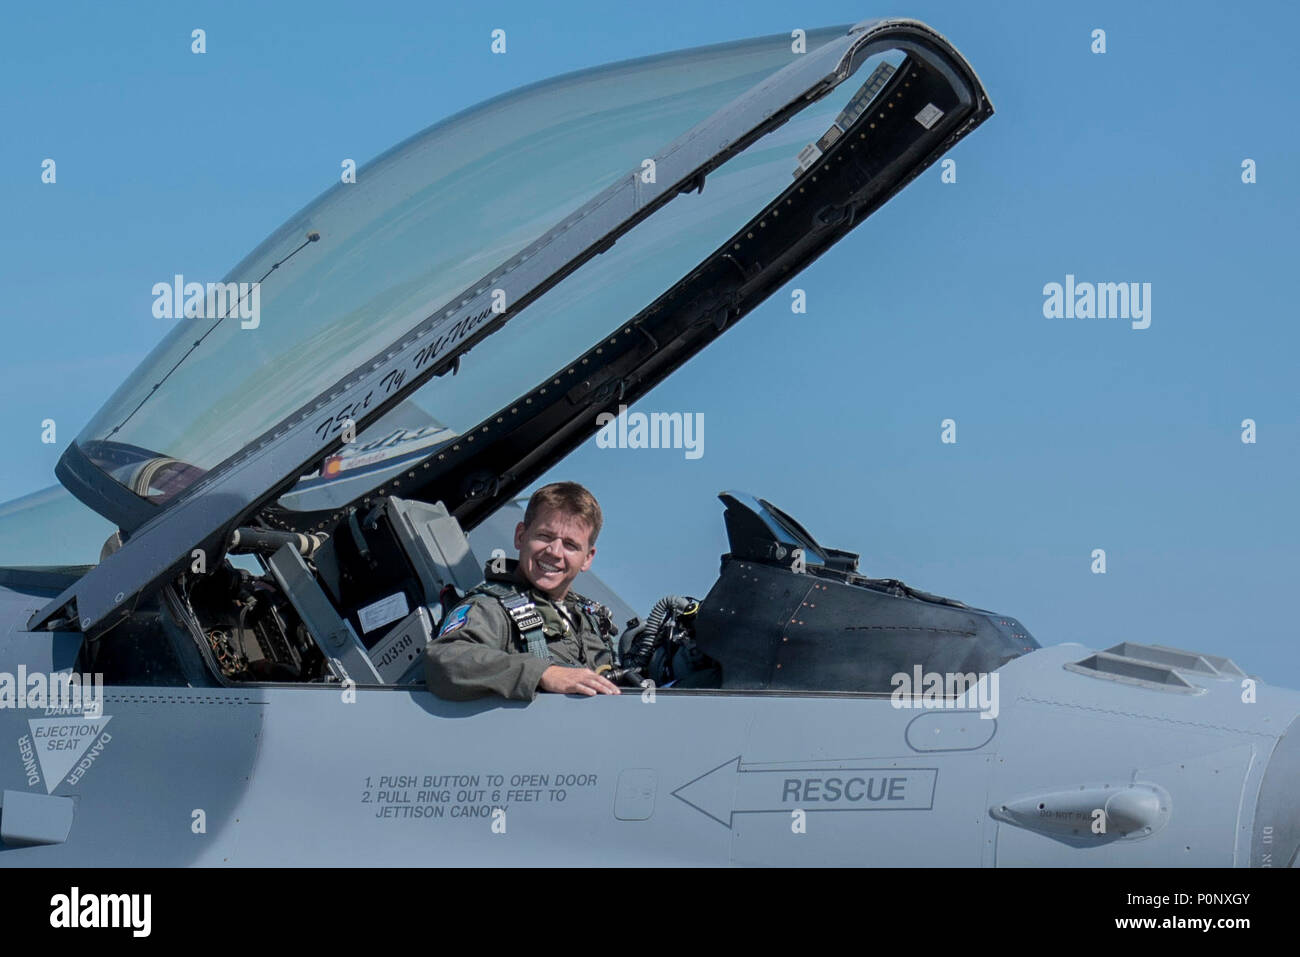 U.S. Air Force Maj. Benjamin 'Scrappy' Couchman, 120th Fighter Squadron, prepares for takeoff prior to an F-16 sortie during Adriatic Strike 2018, Cerklje ob Krki Air Base, Slovenia, June 6, 2018. The Colorado Air National Guard, 140th Wing, Buckley Air Force Base, Colorado, brought four F-16 Fighting Falcons and approximately 40 support personnel to participate in Adriatic Strike 2018, a Slovenian-led JTAC training attended by 22 other NATO nations to conduct interoperability training and joint readiness capabilities among the NATO allies and partners. (U.S. Air National Guard photo by Staff  Stock Photo